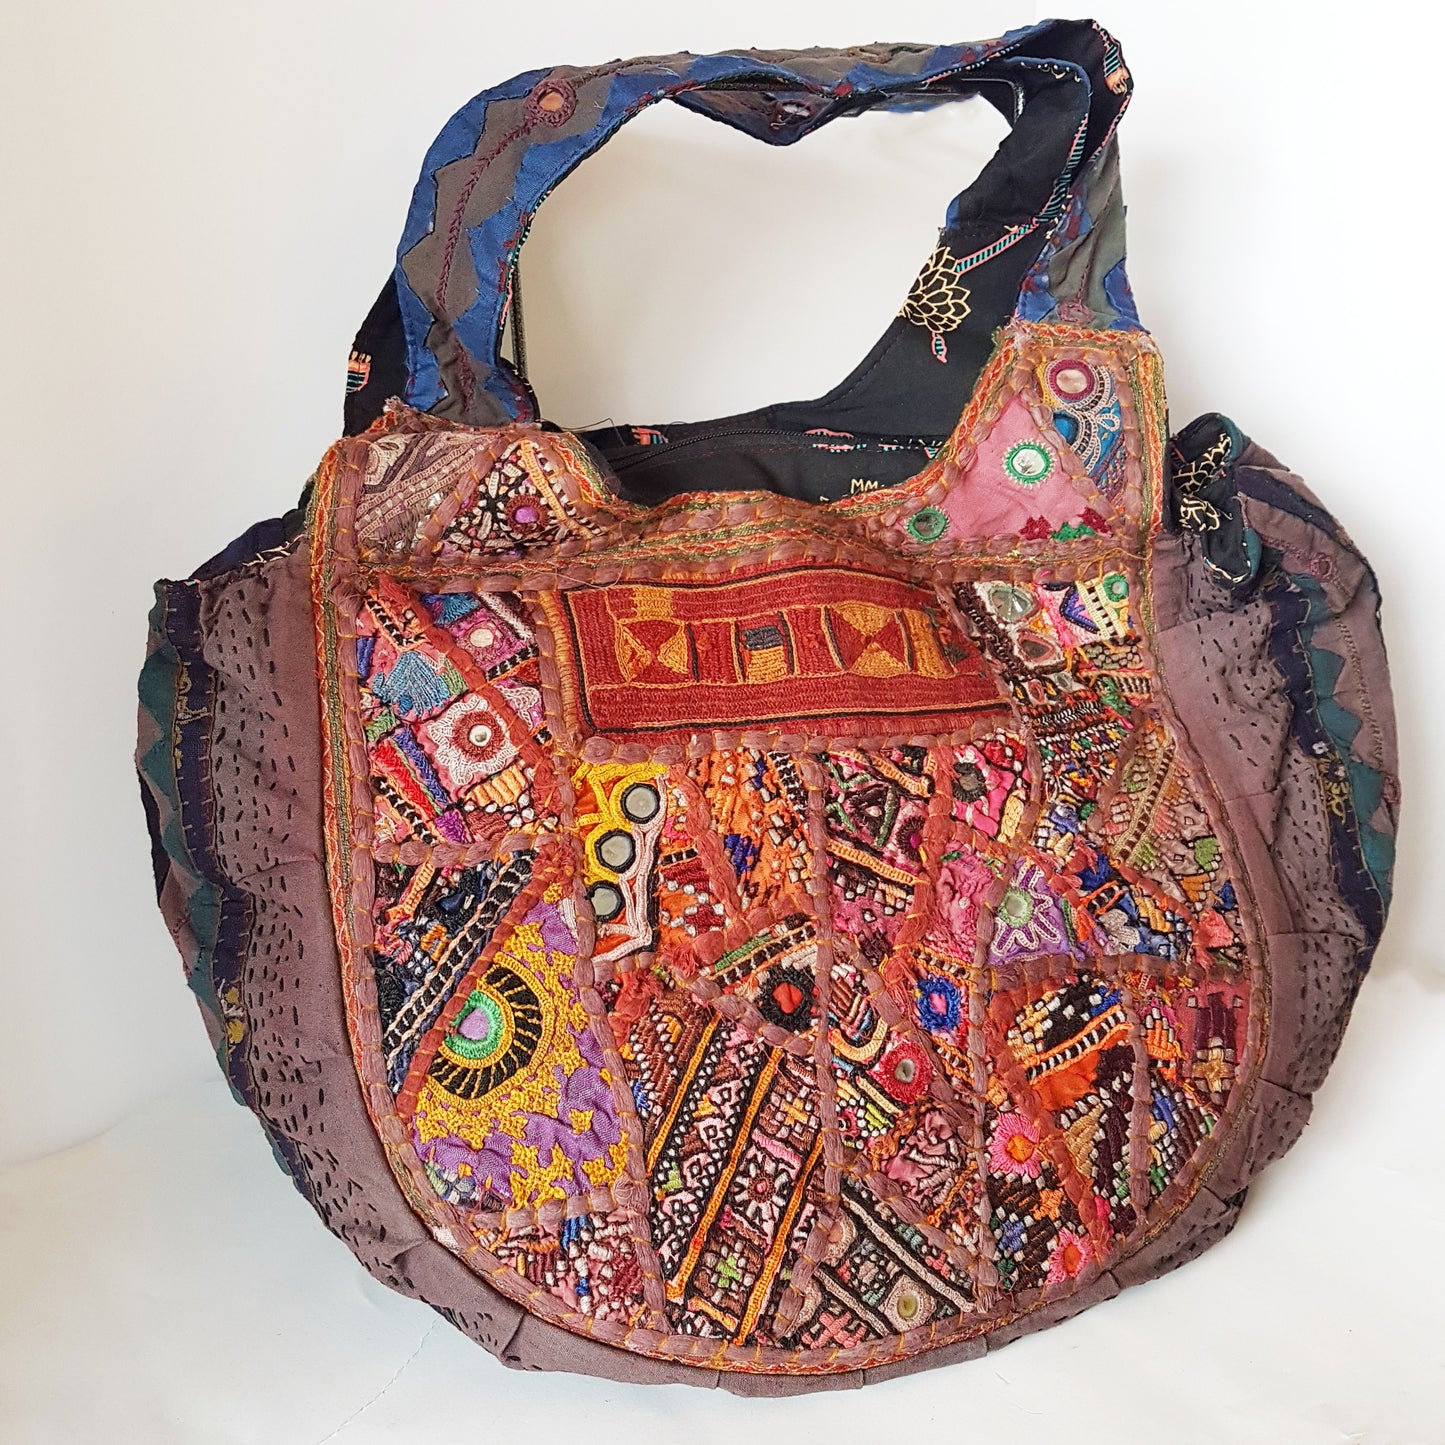 Banjara shoulder bag. Authentic vintage tribal gypsy storage bag in rich red & purple with embroidered mirror work. One of a kind beauty.